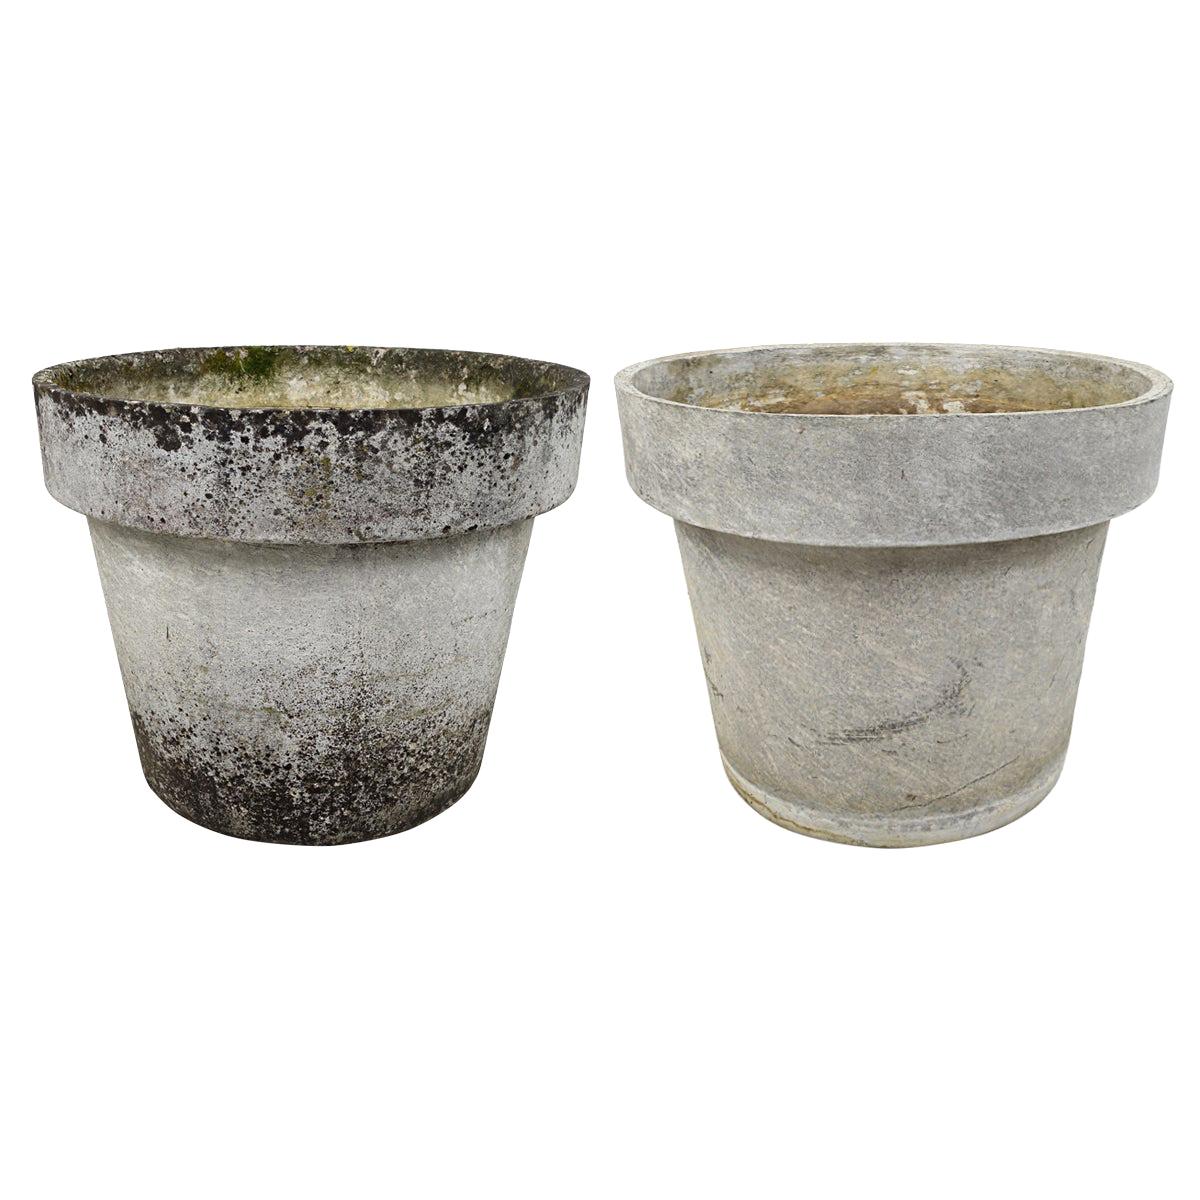 Pair of Extra Large Planters in the Shape of Flower Pots, Willy Guhl for Eternit